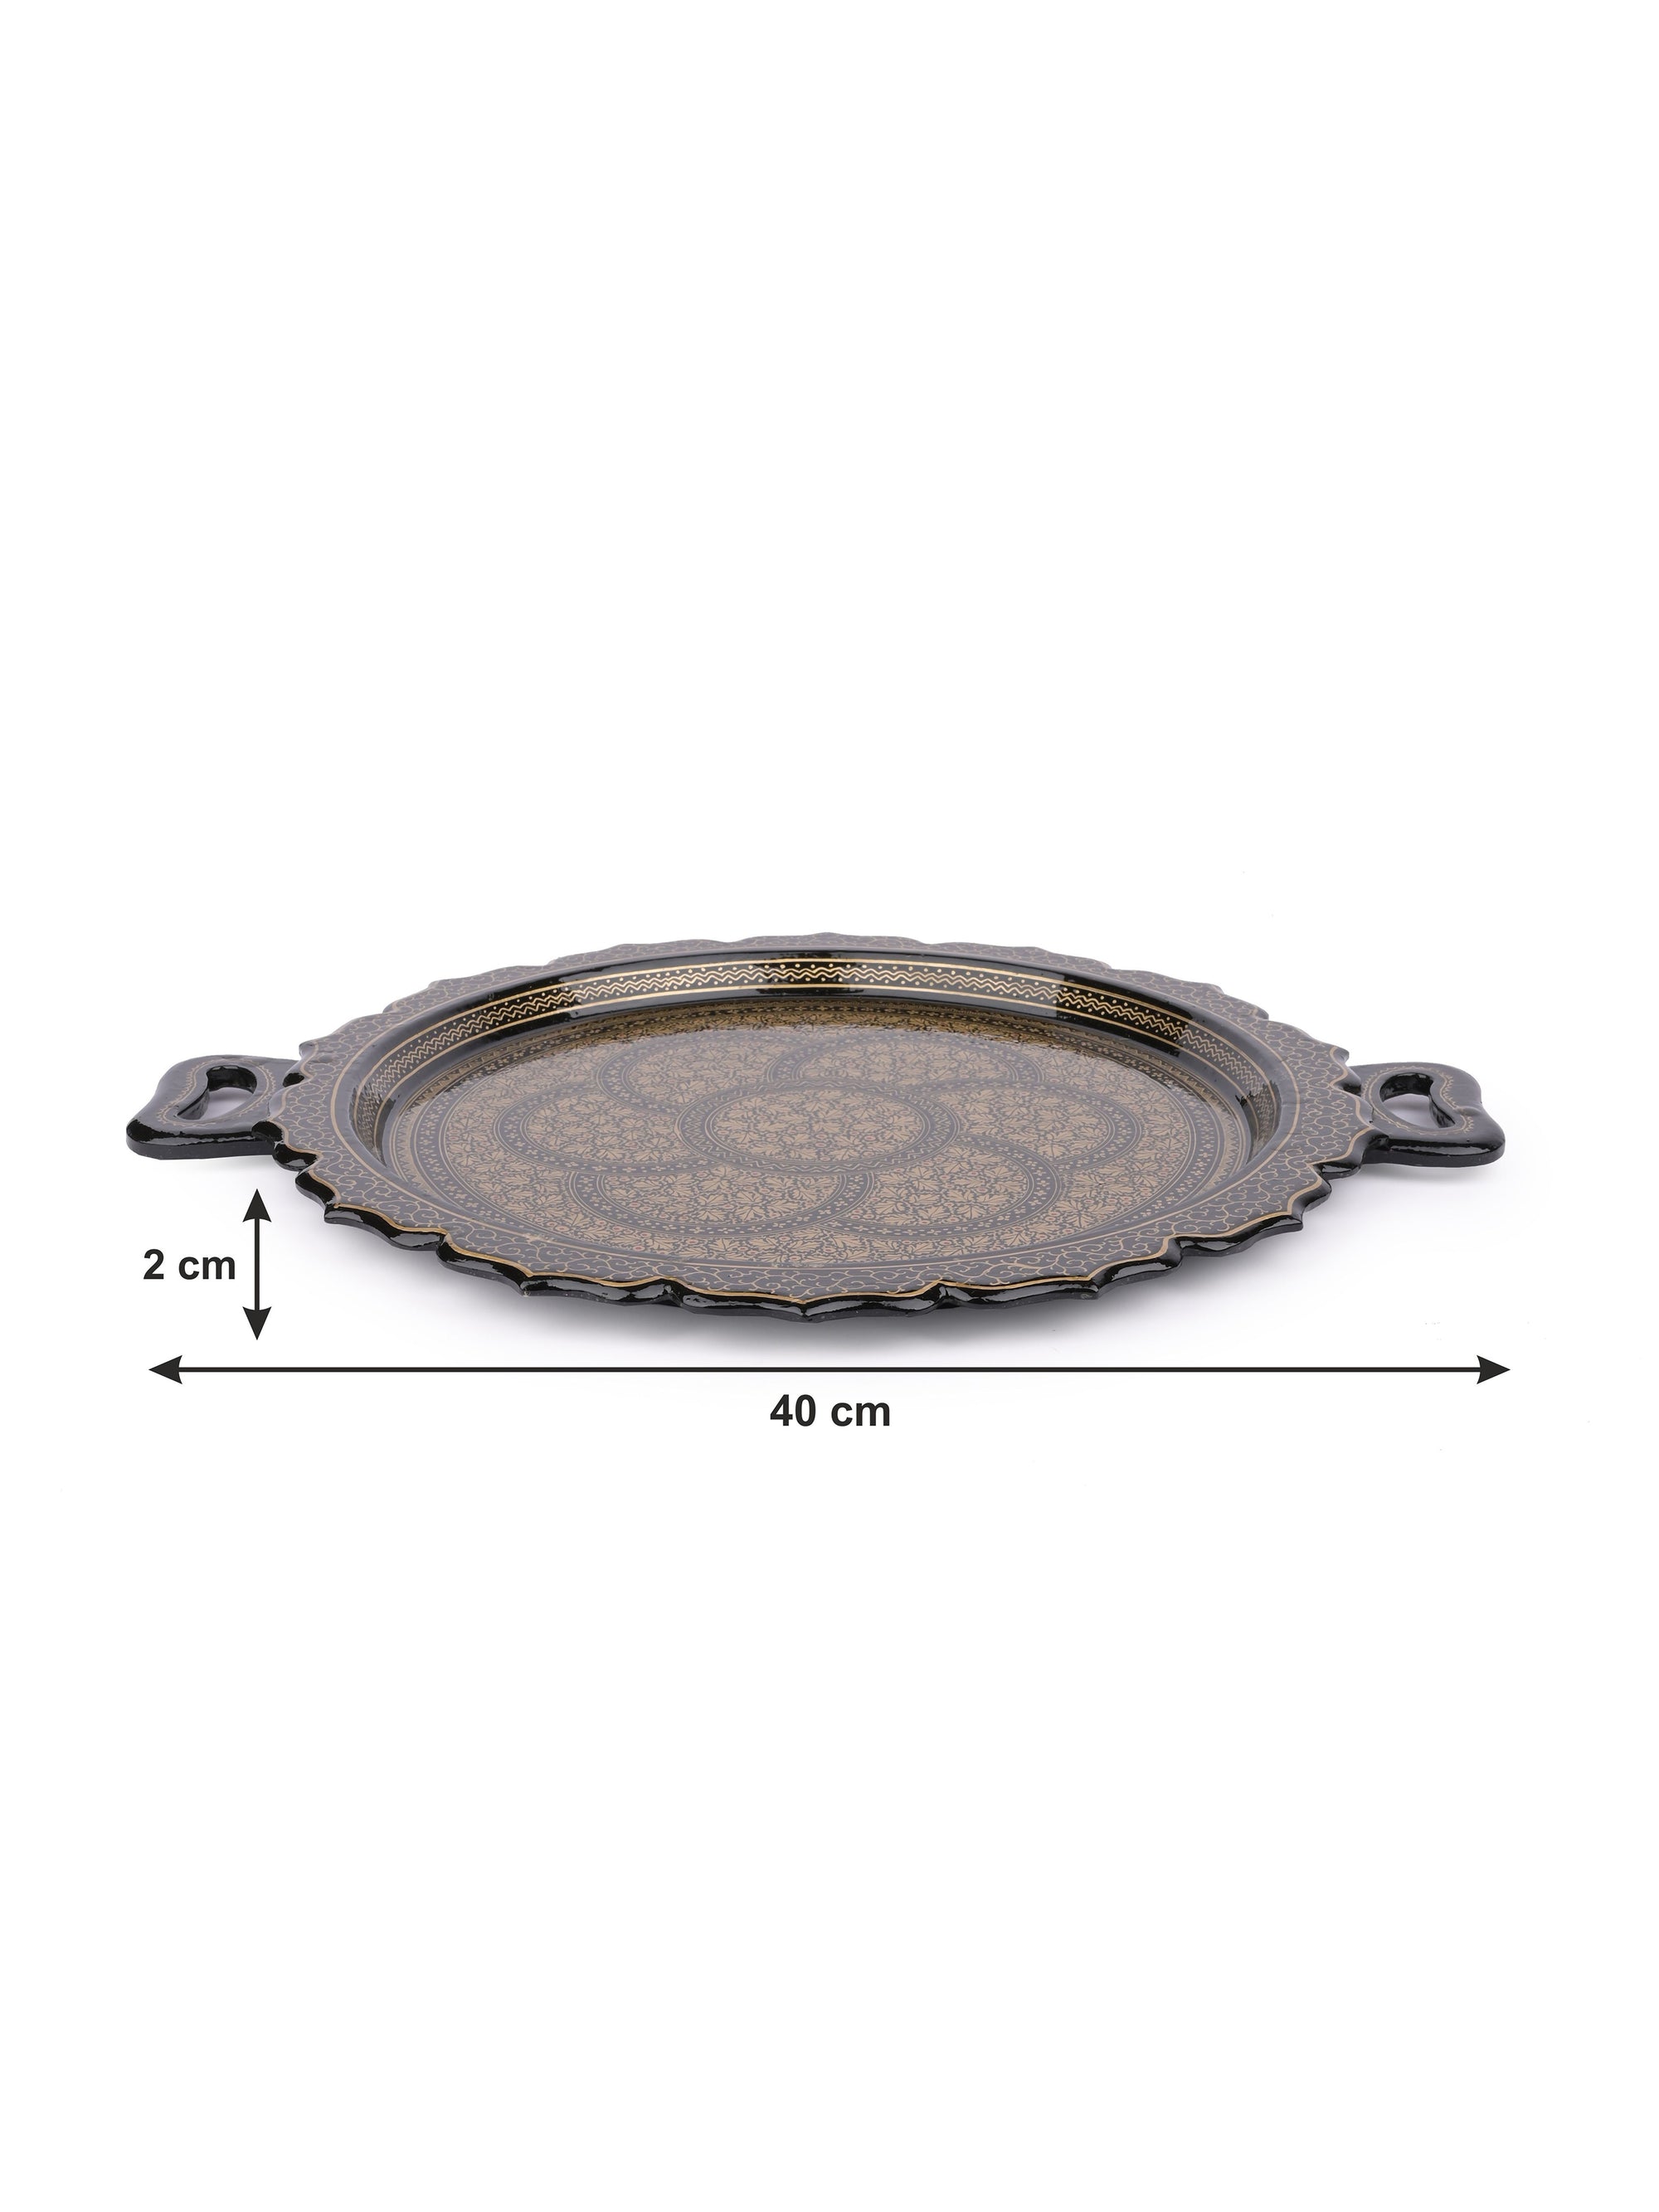 Paper Mache, Black and Gold Round Decorative Serving Tray with Handle - The Heritage Artifacts